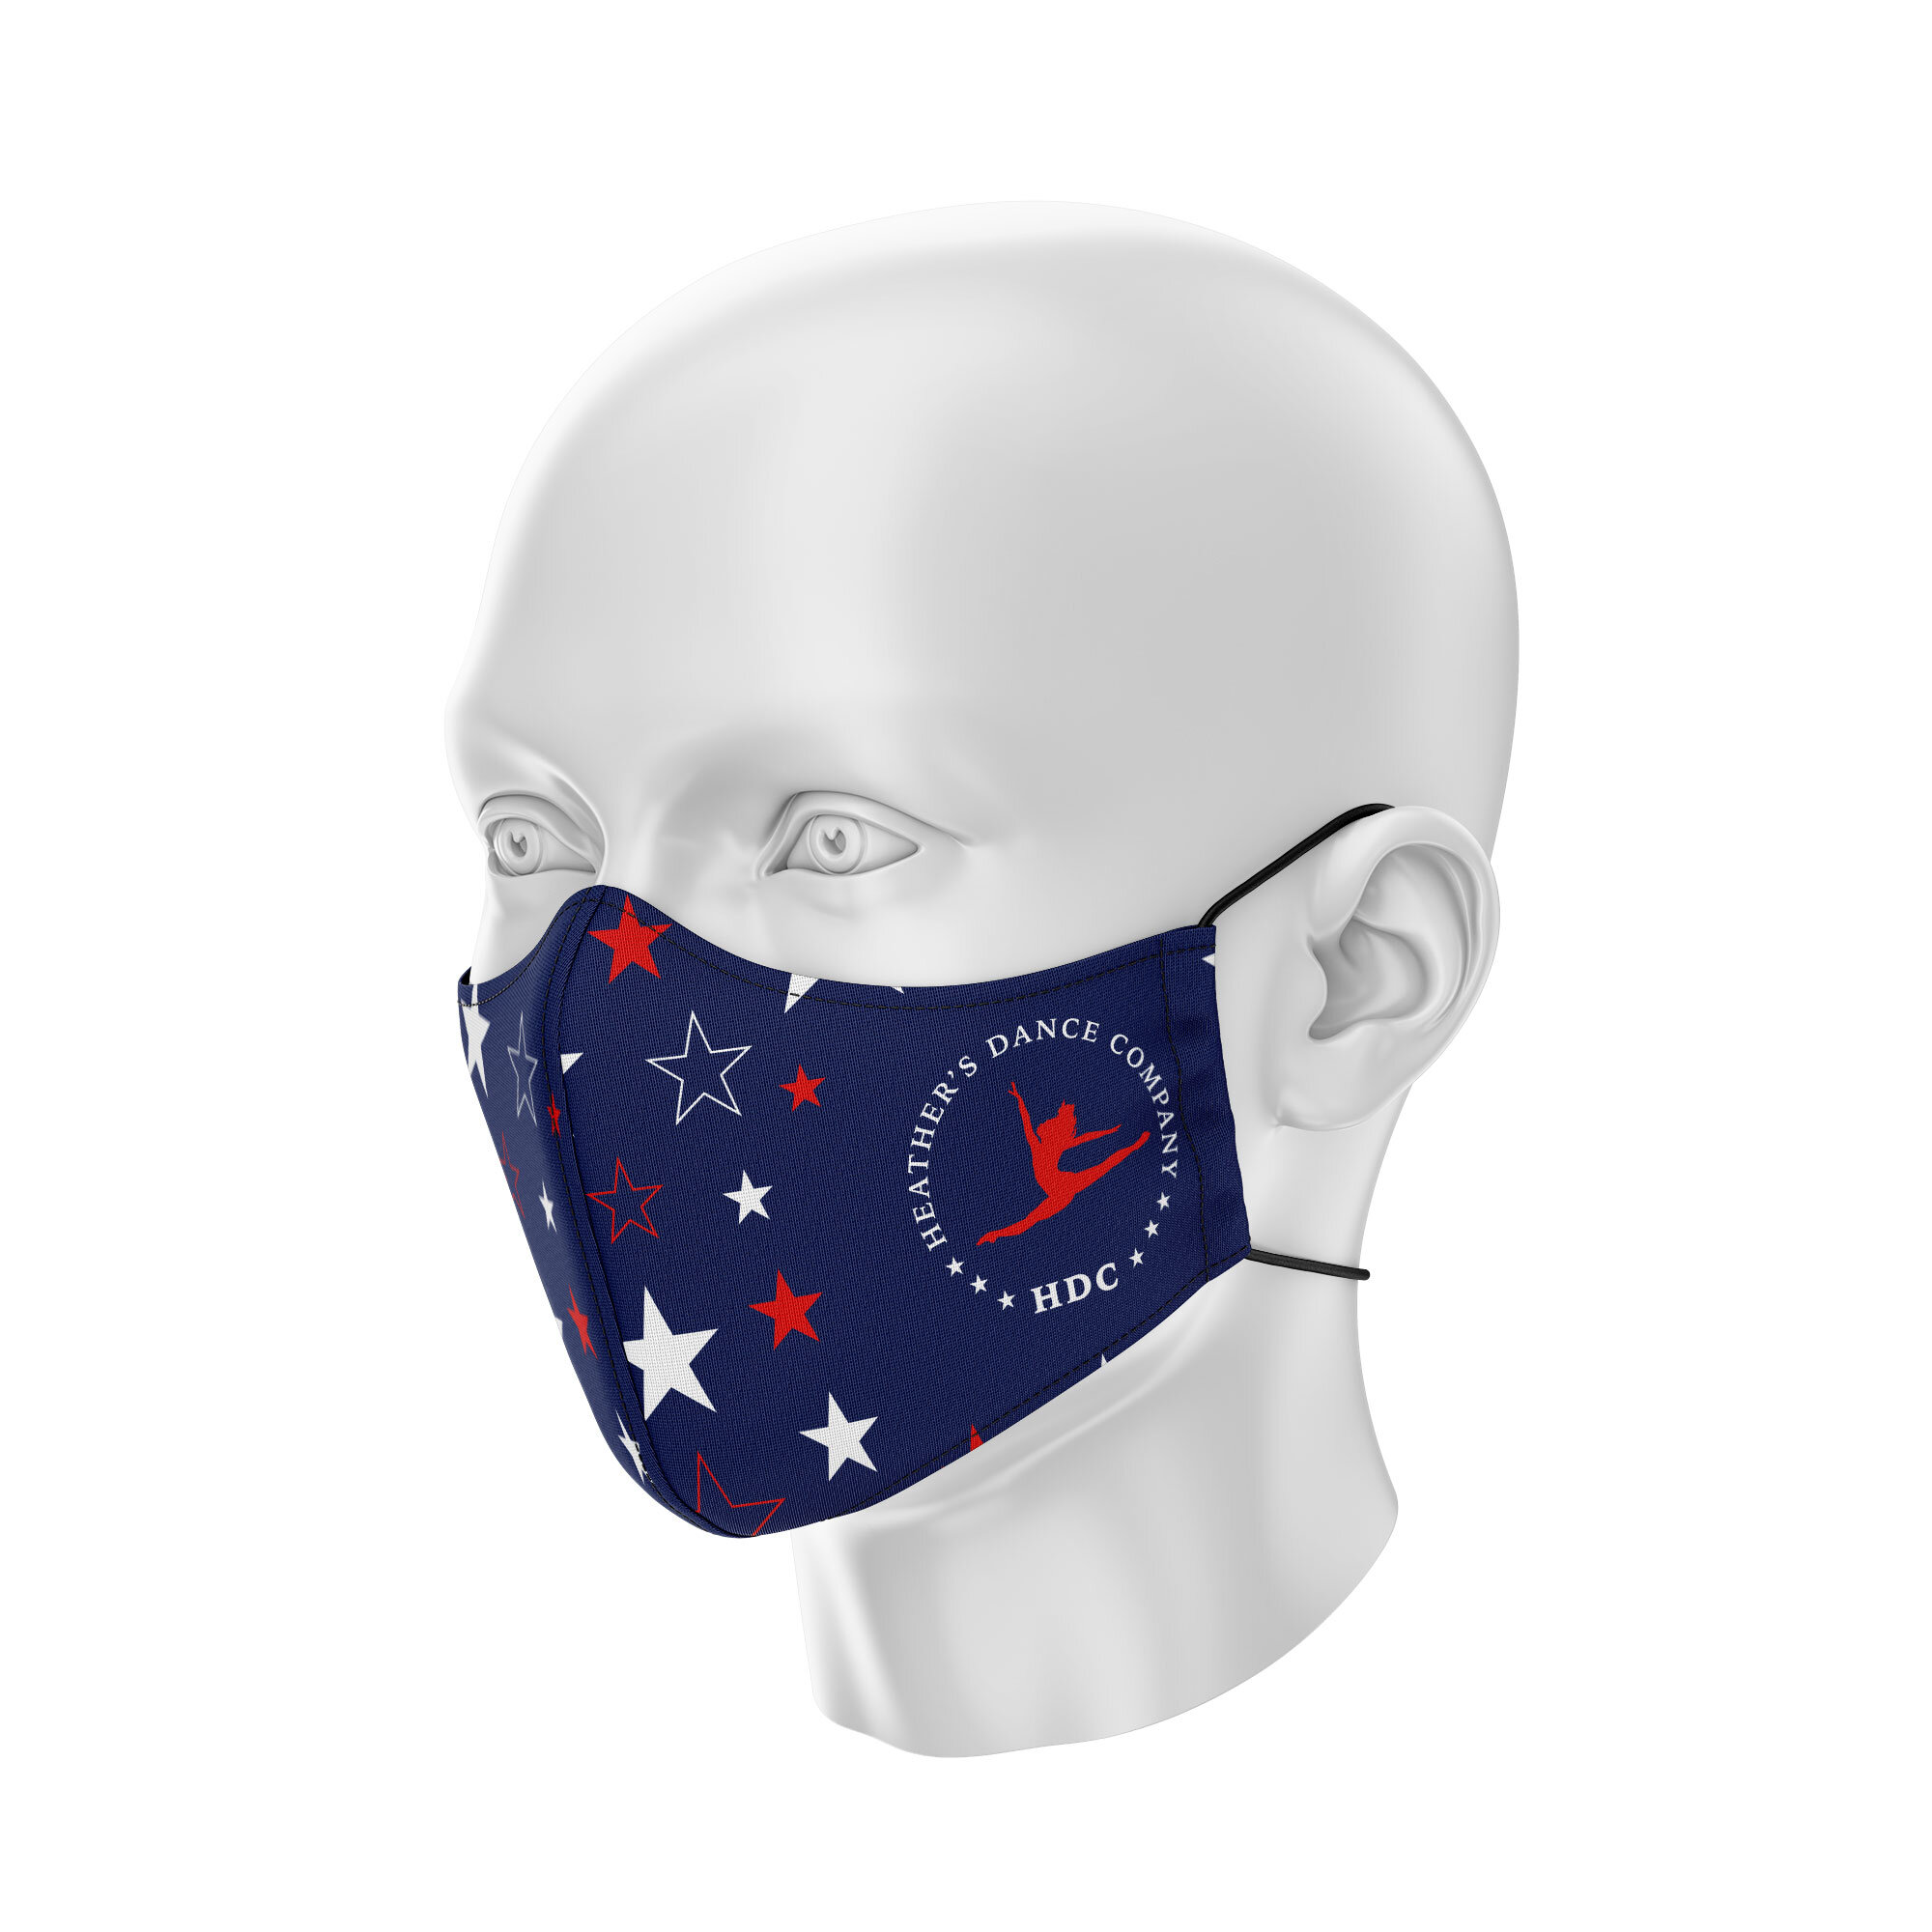 Heathers Dance Company Branded Face Mask